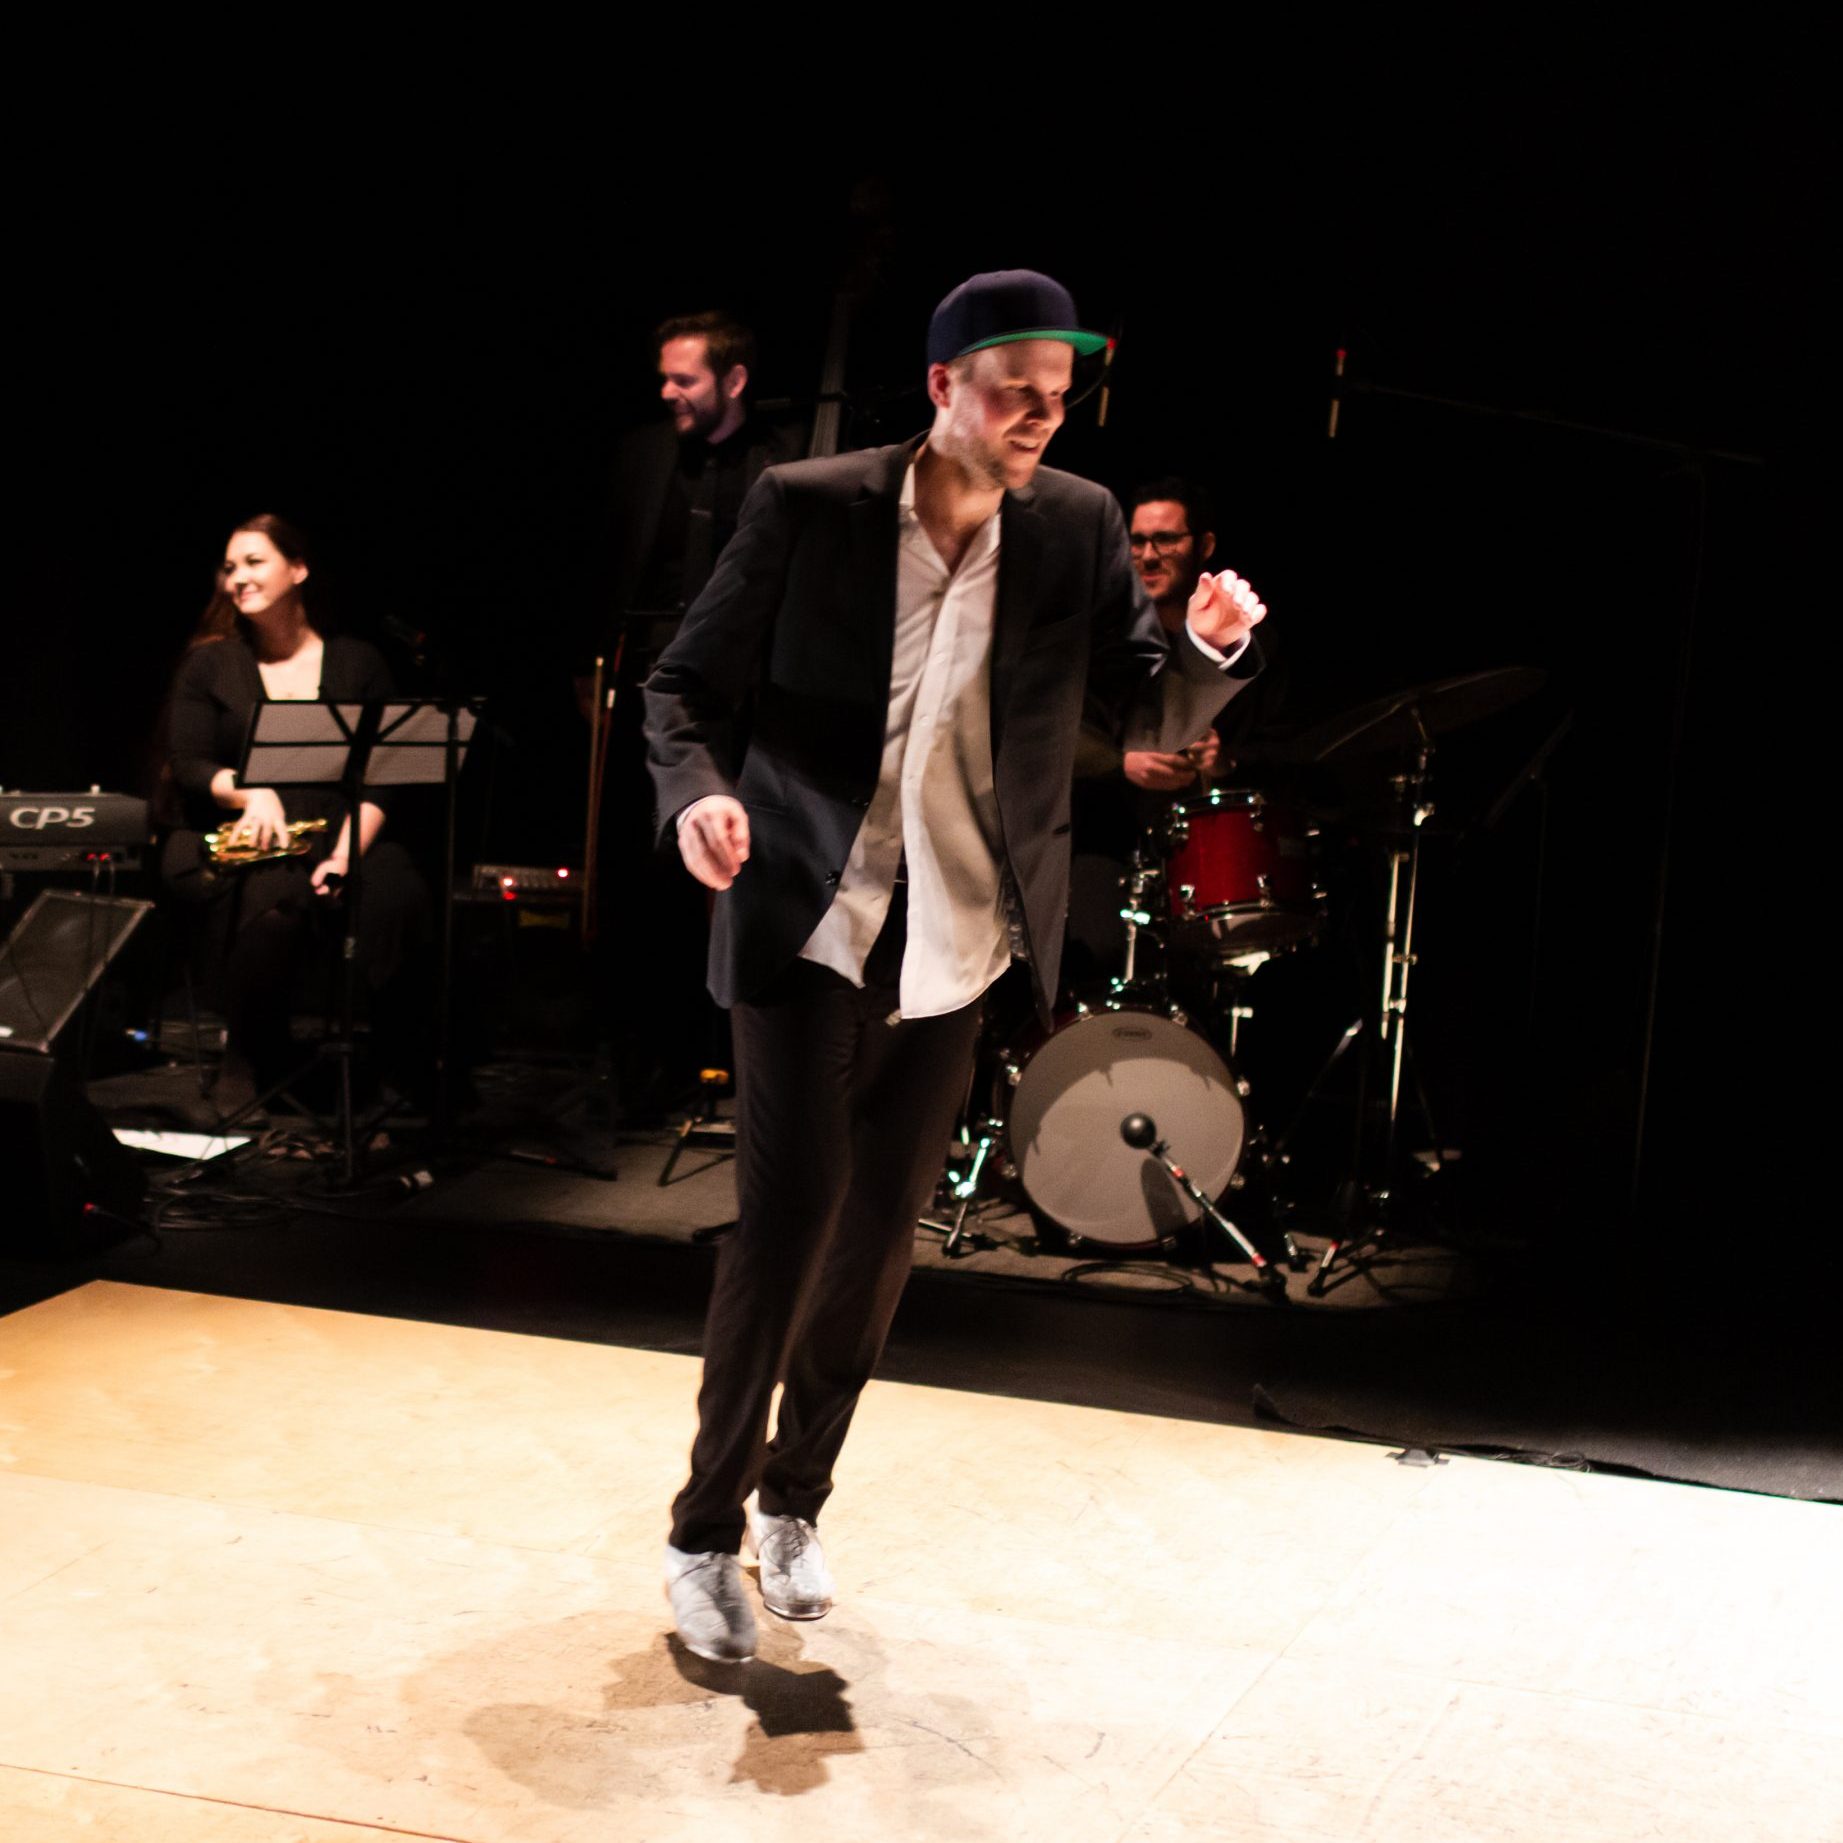 A tap dancer performs on a bright wood floor with a band behind him. He is wearing a ball cap and a black blazer and pants. The musicians behind him are laughing and playing in a casual manner.